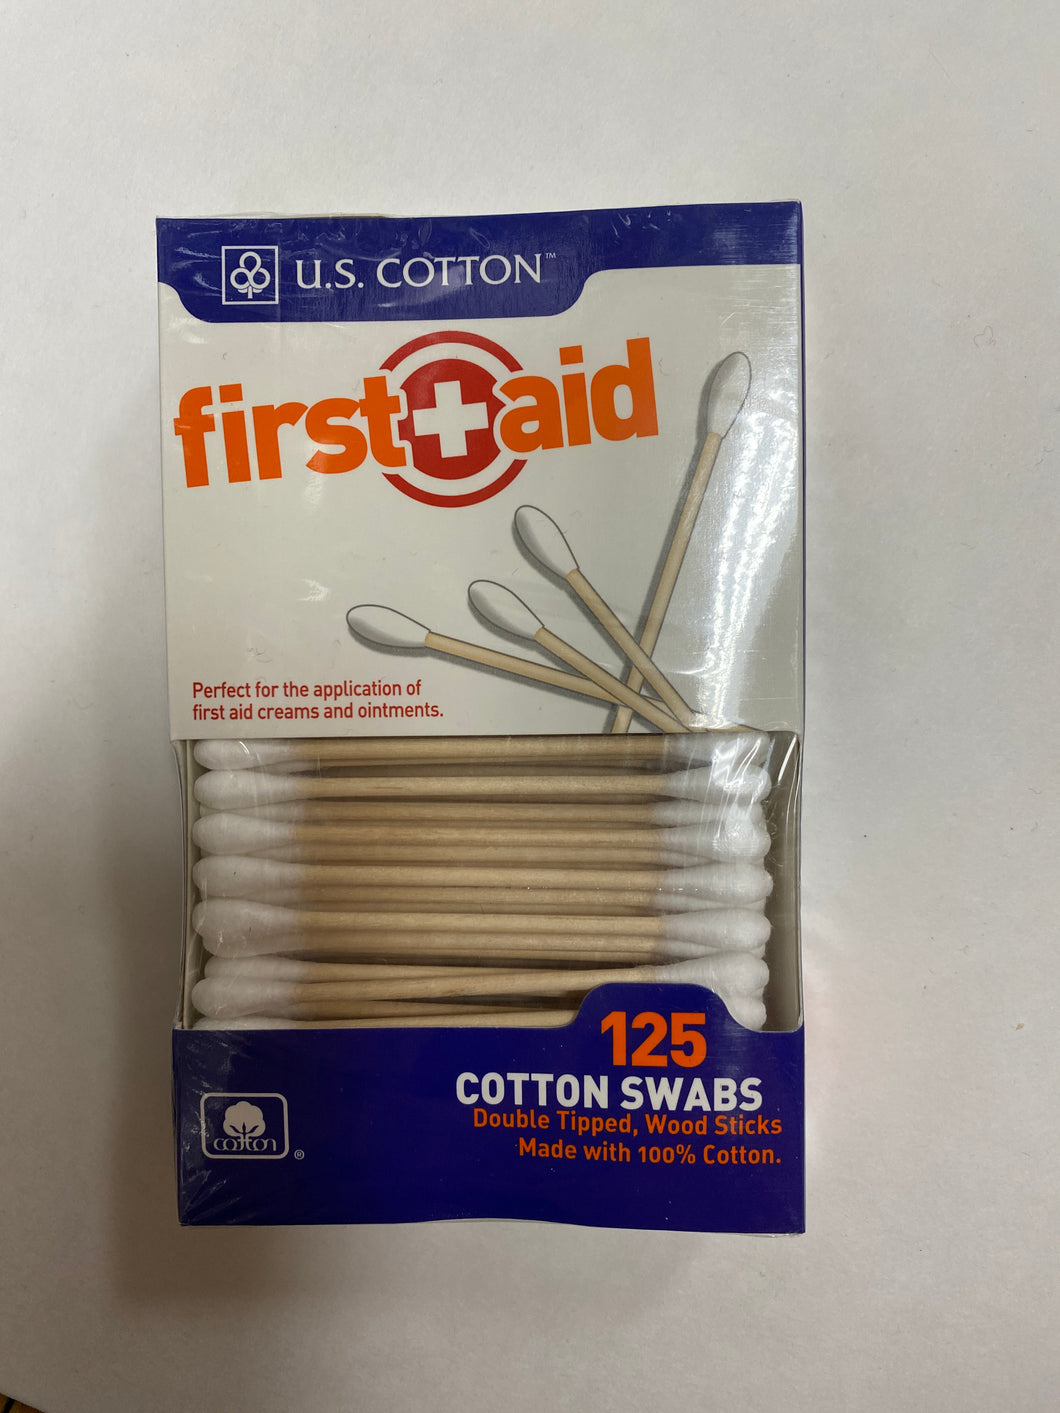 US Cotton First + Aid Cotton Swabs 125 count